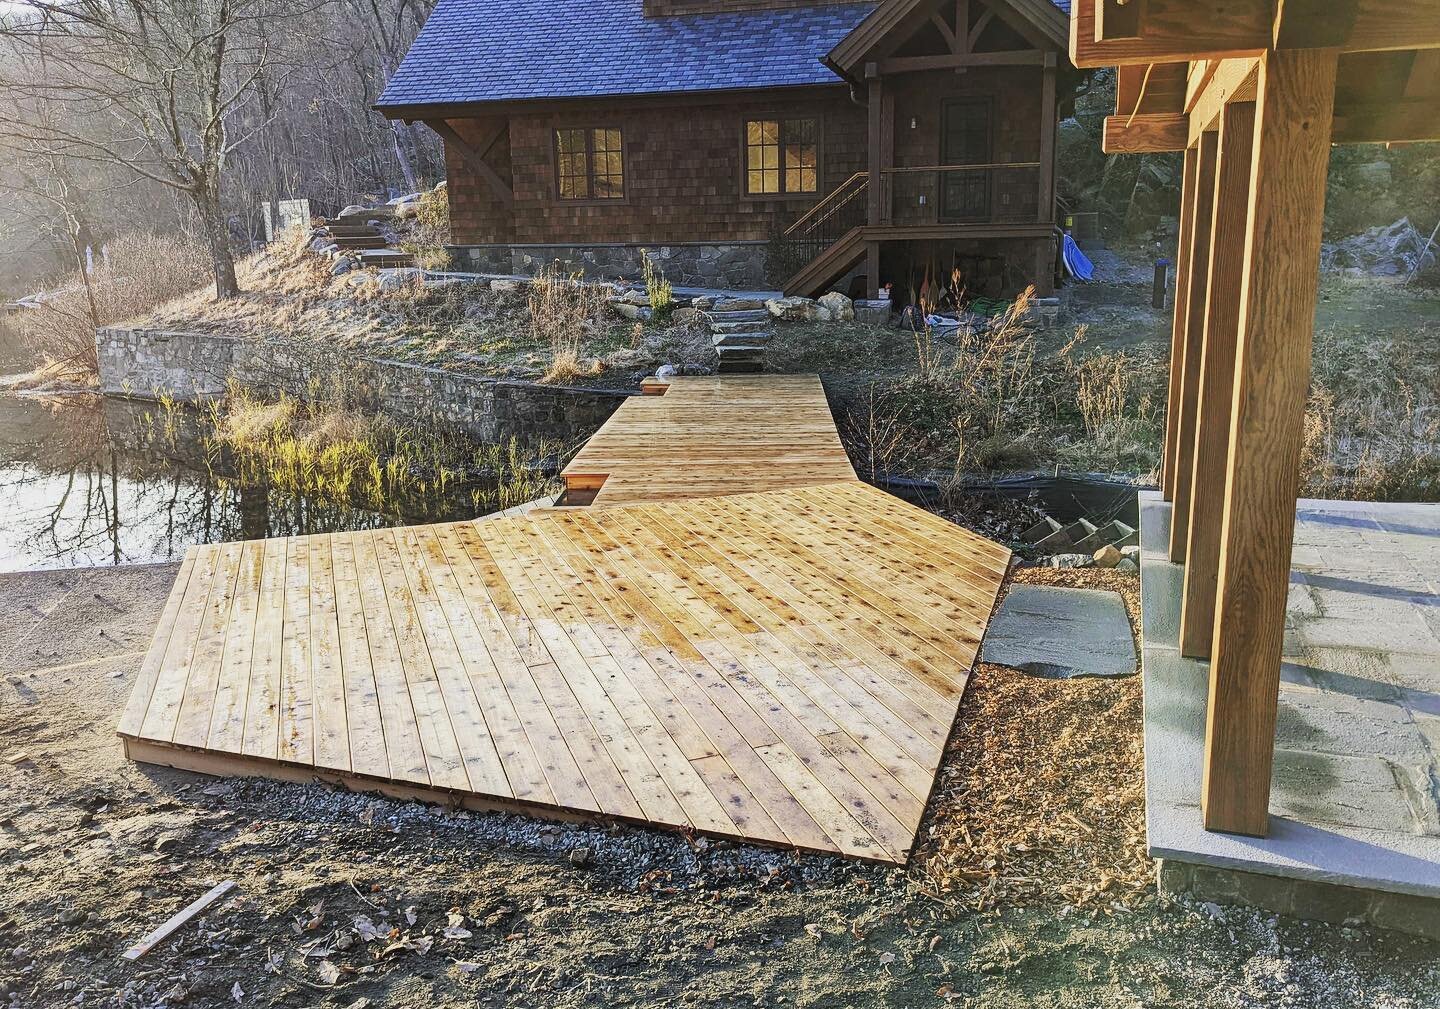 Evening golden light rays celebrated today on this newly built ground level deck across an important #geospiritual lake outlet. Another step forward here on this multi-year lakefront meadow garden vision. The deck shape will make much more sense  aft